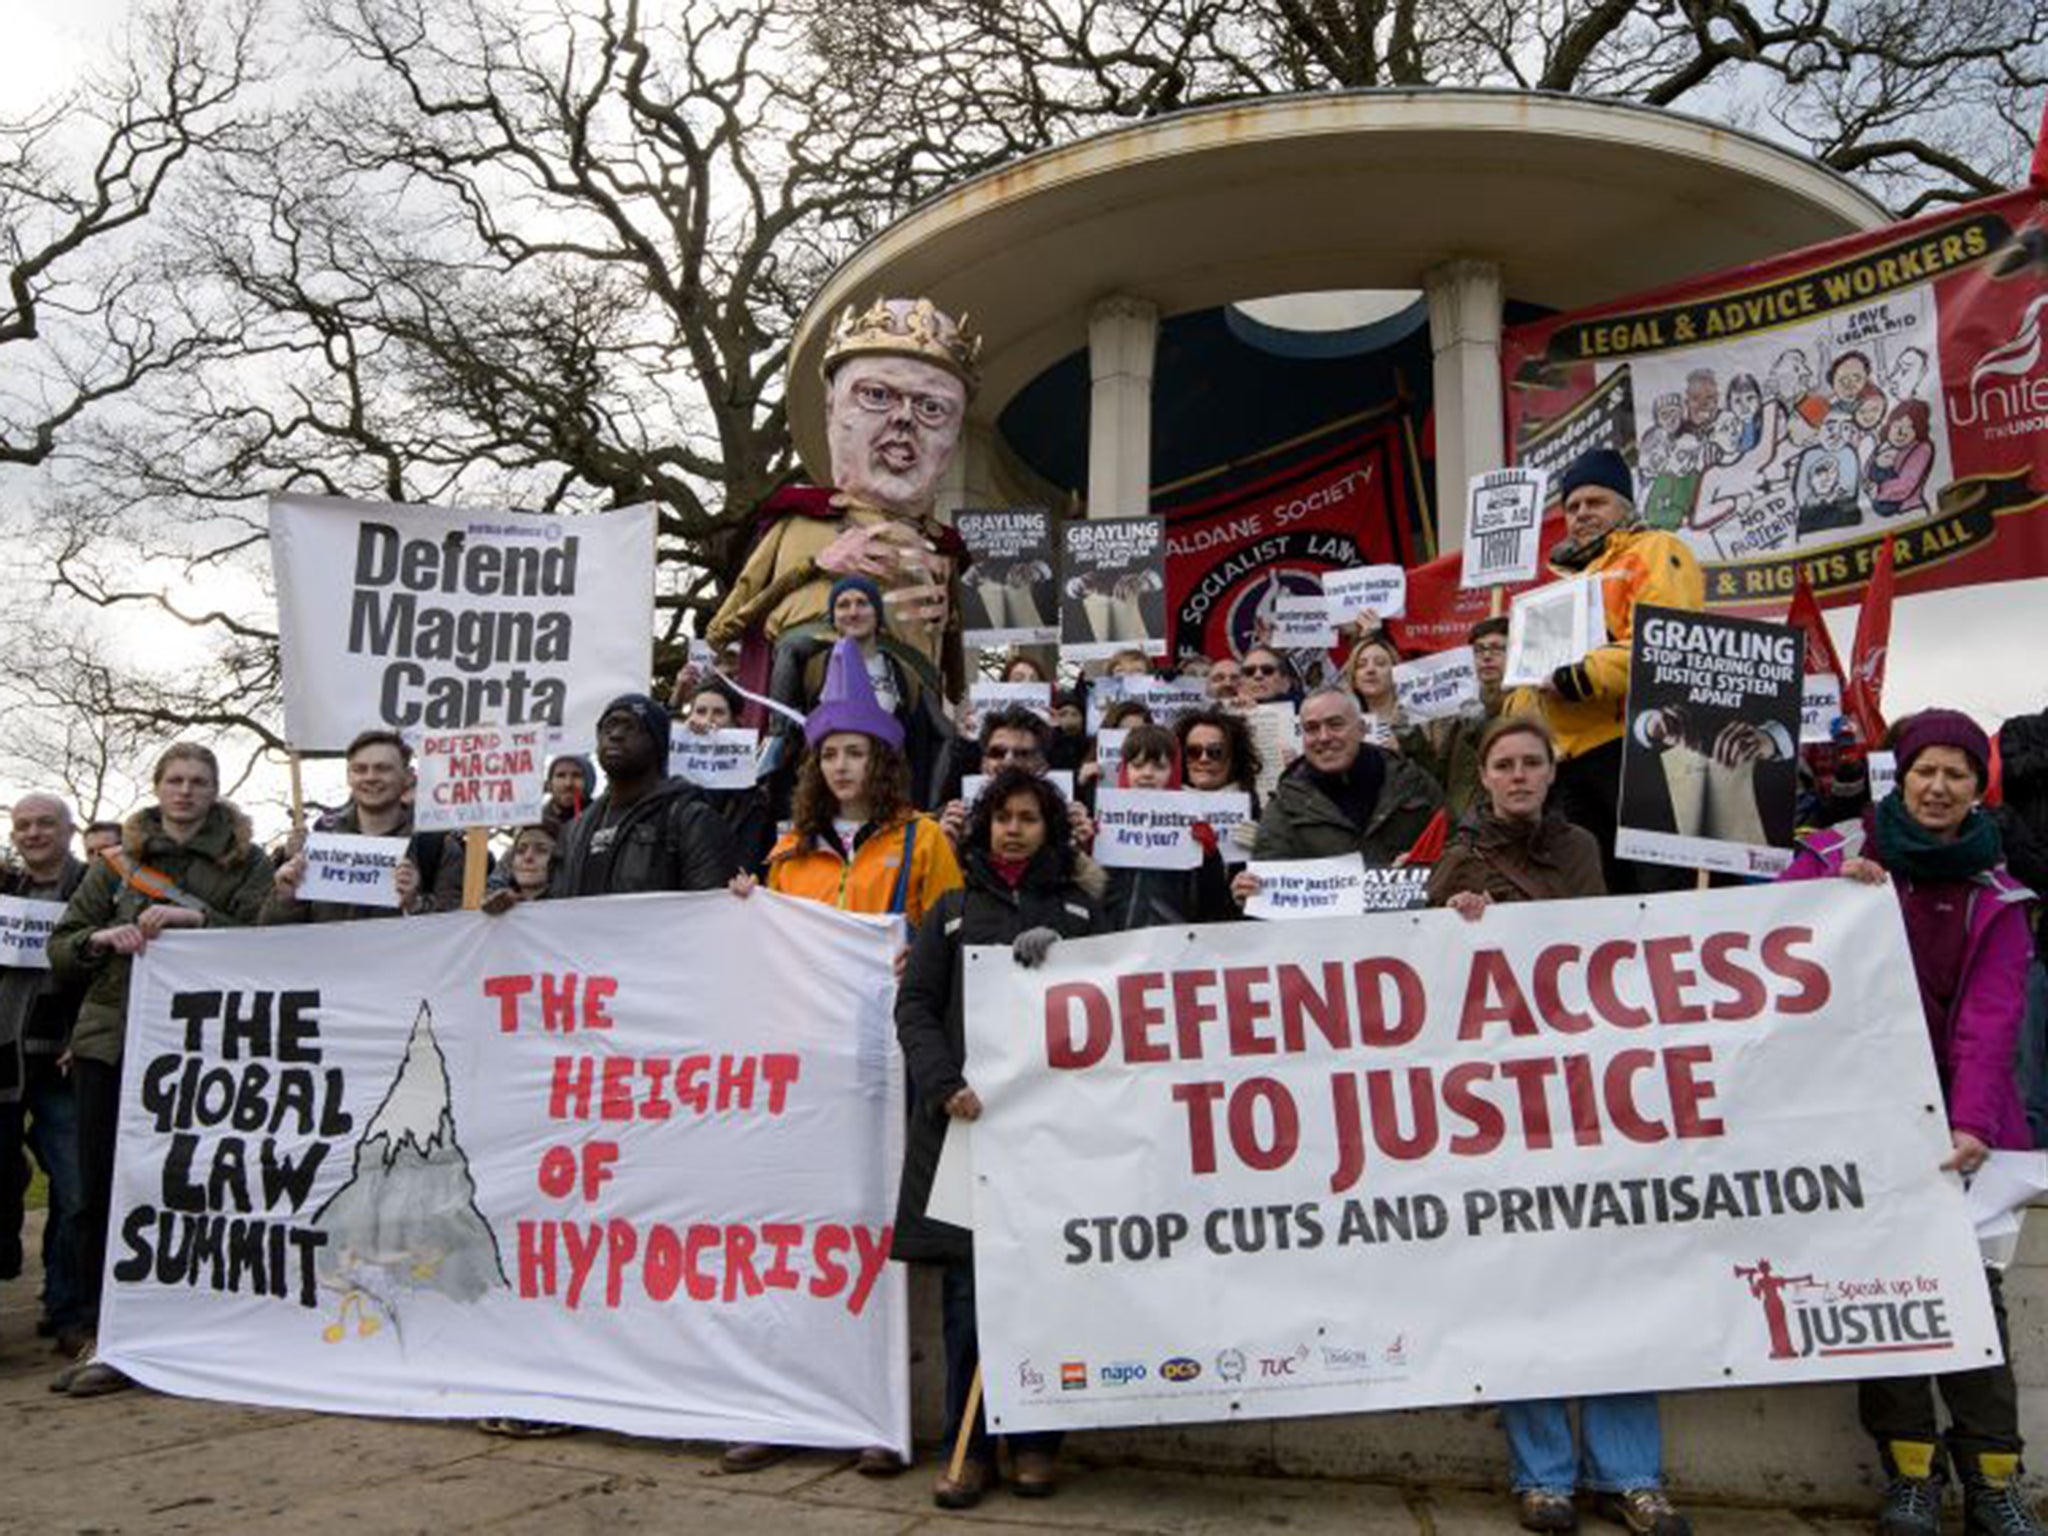 The Justice Alliance gathered at Runnymede in Surrey yesterday, in protest at what it sees as the undermining of the principle of justice for all